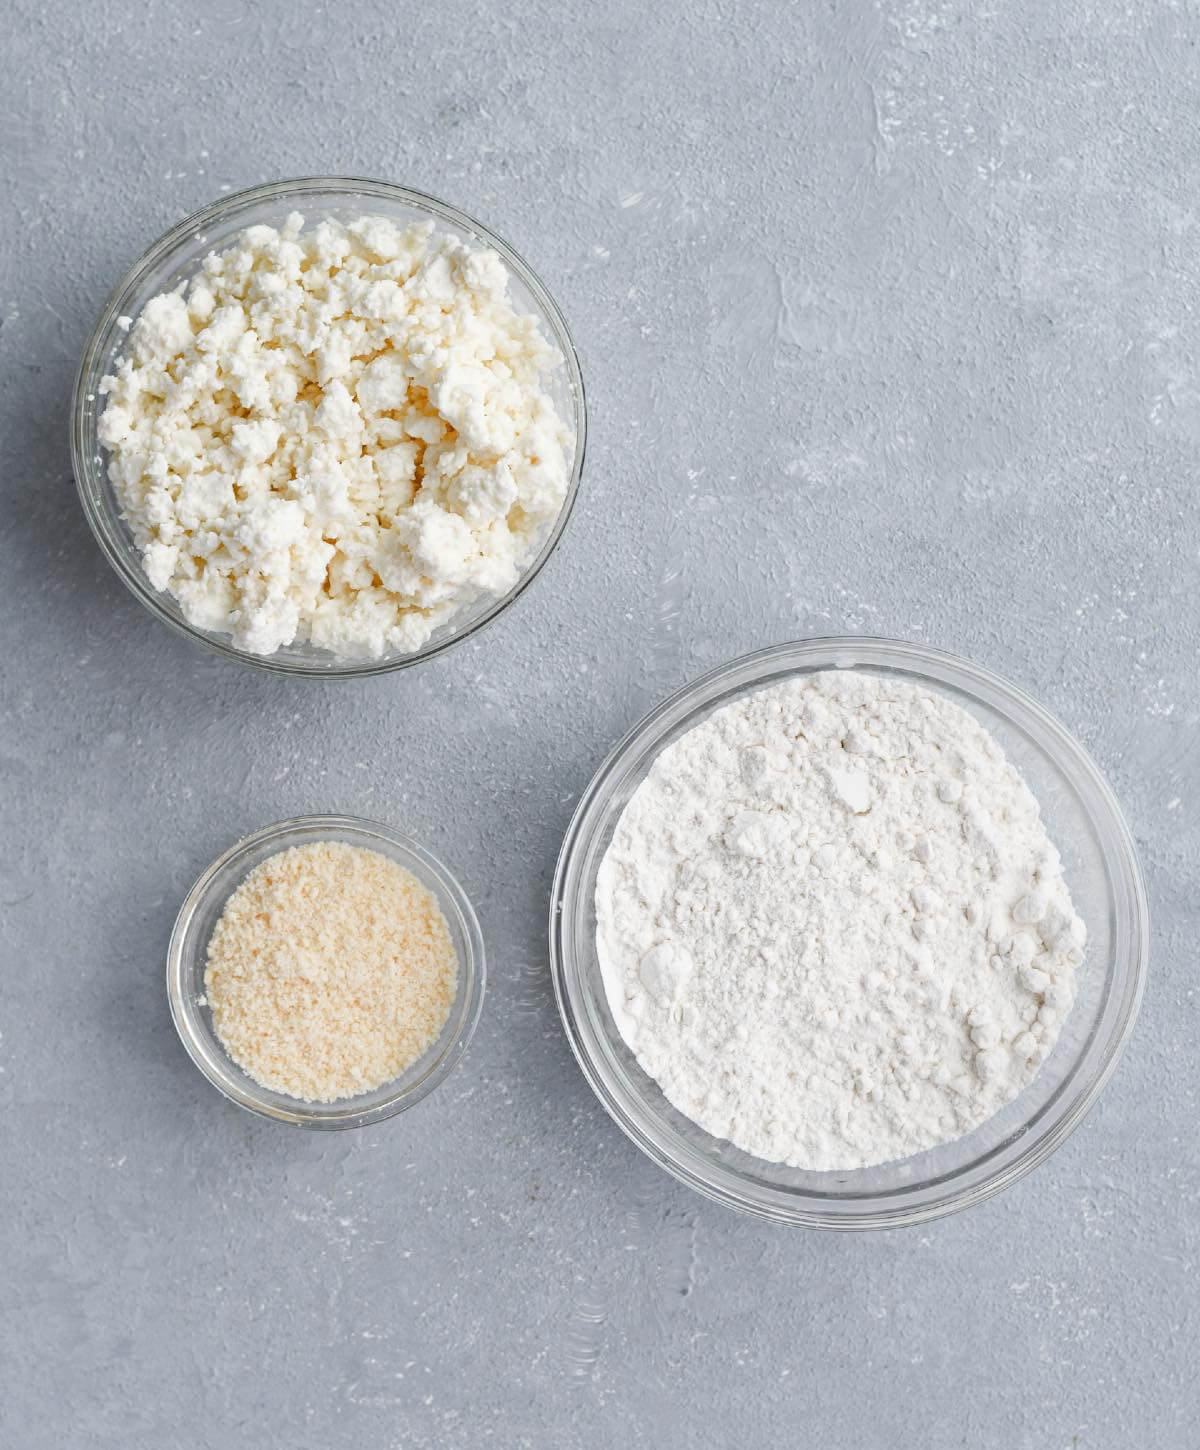 crumbled feta, flour, and breadcrumbs in individual glass bowls.